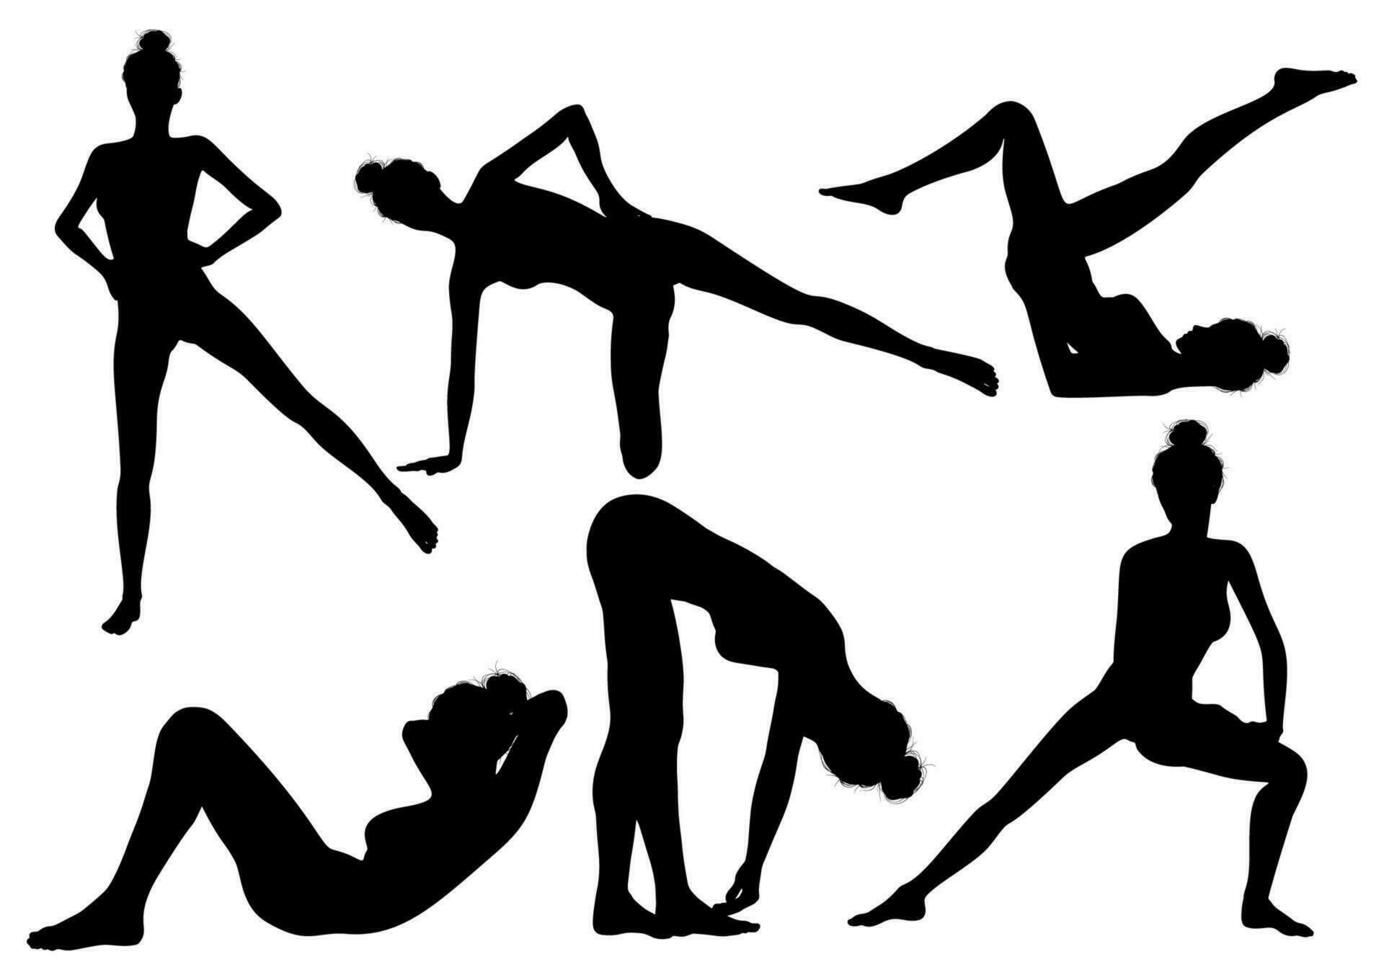 female silhouettes in sports and stretching poses vector